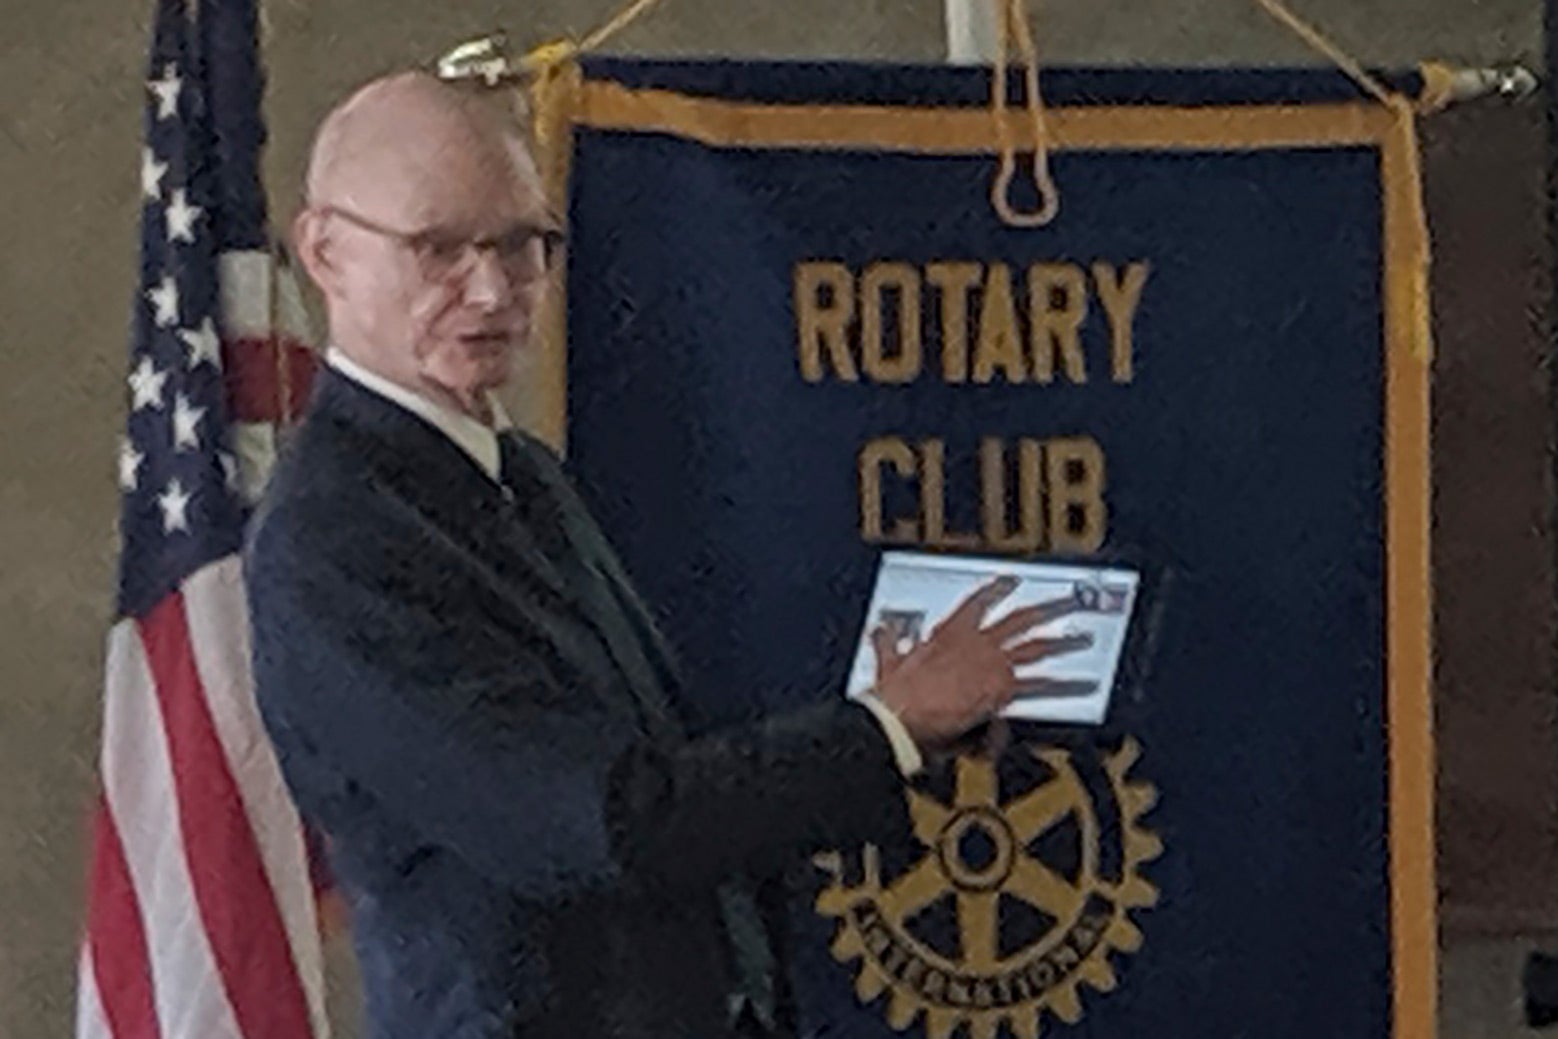 Walter Hussman Jr., publisher of the statewide newspaper the Arkansas Democrat-Gazette, speaks to members of the Hope, Arkansas Rotary Club.